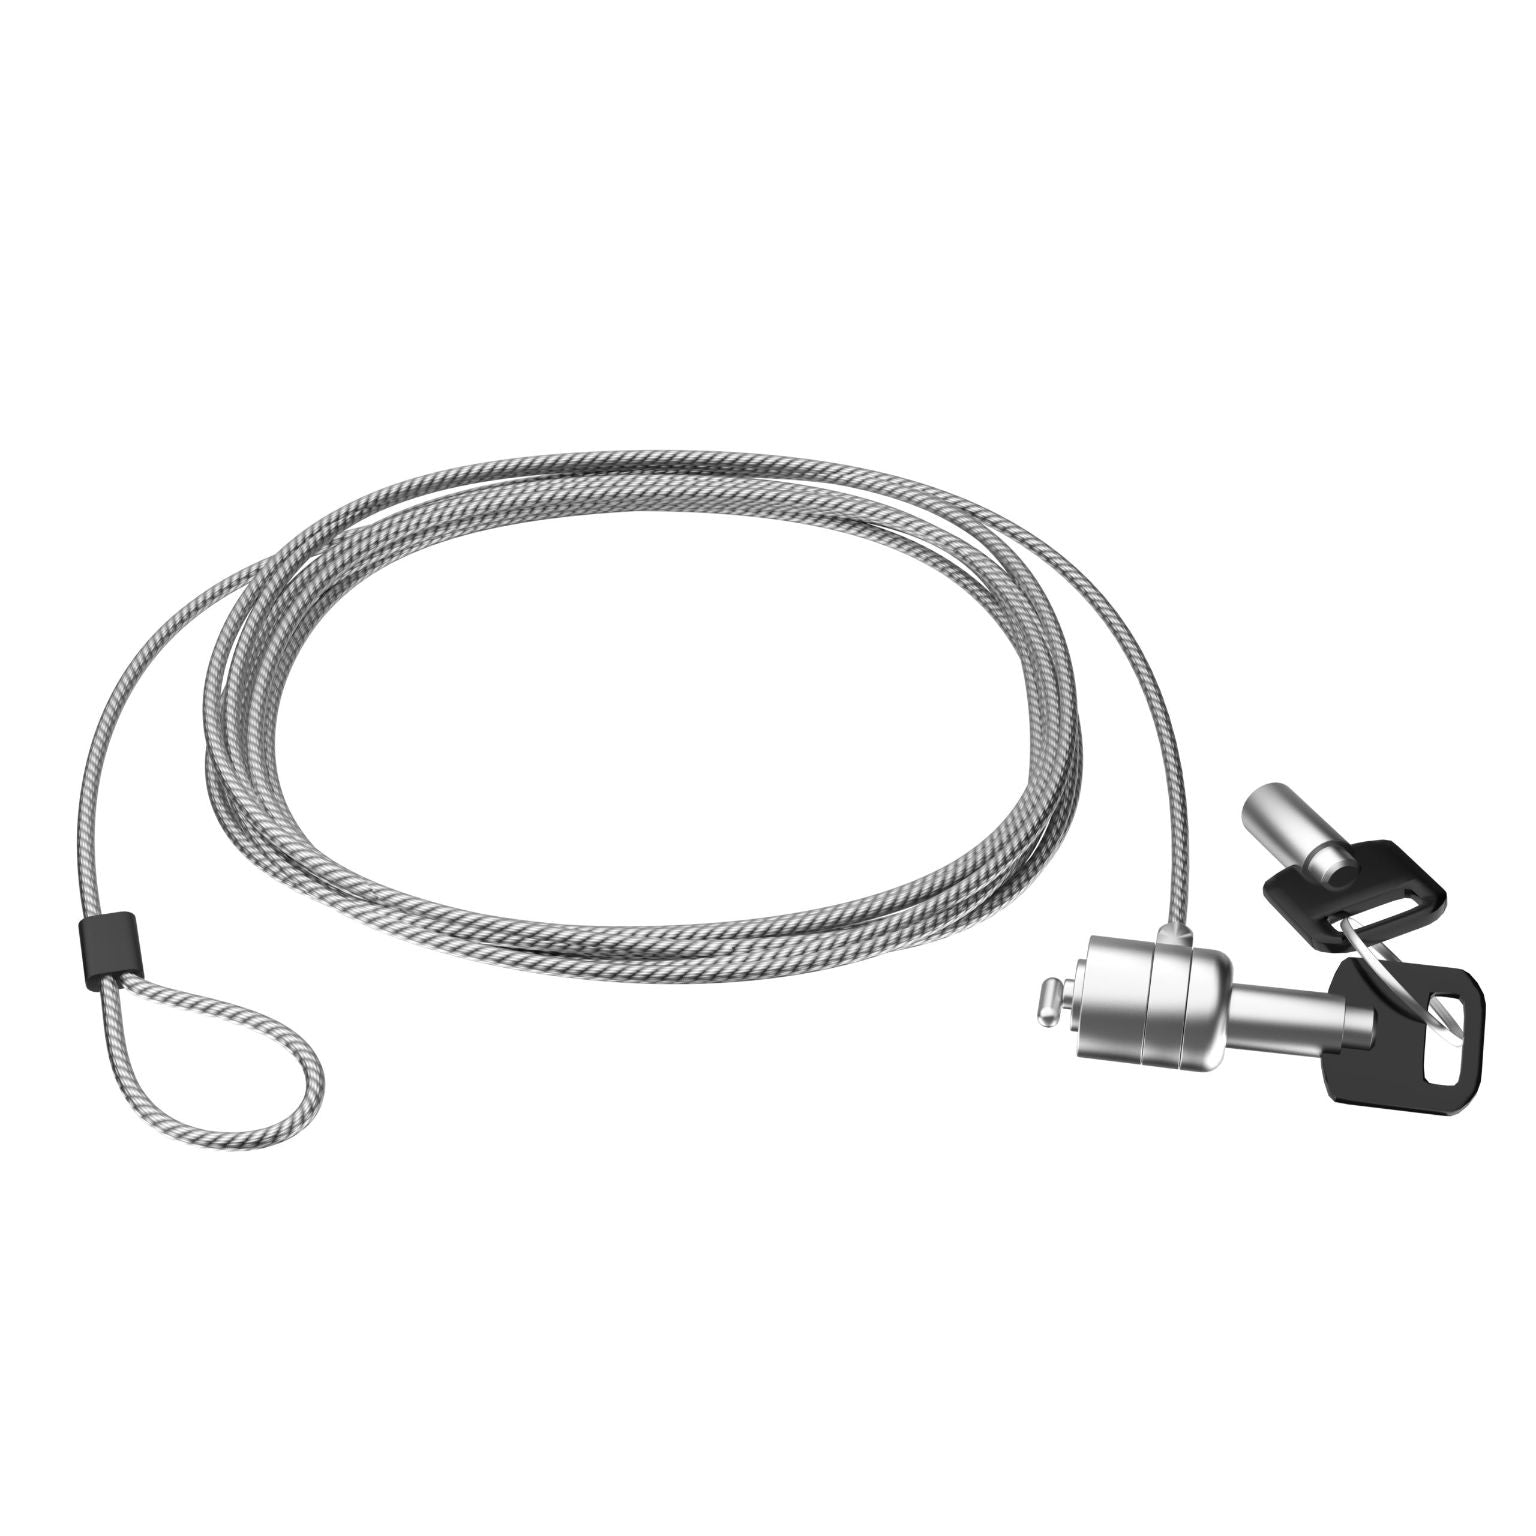 10ft Cable with K-Lock and Master Key